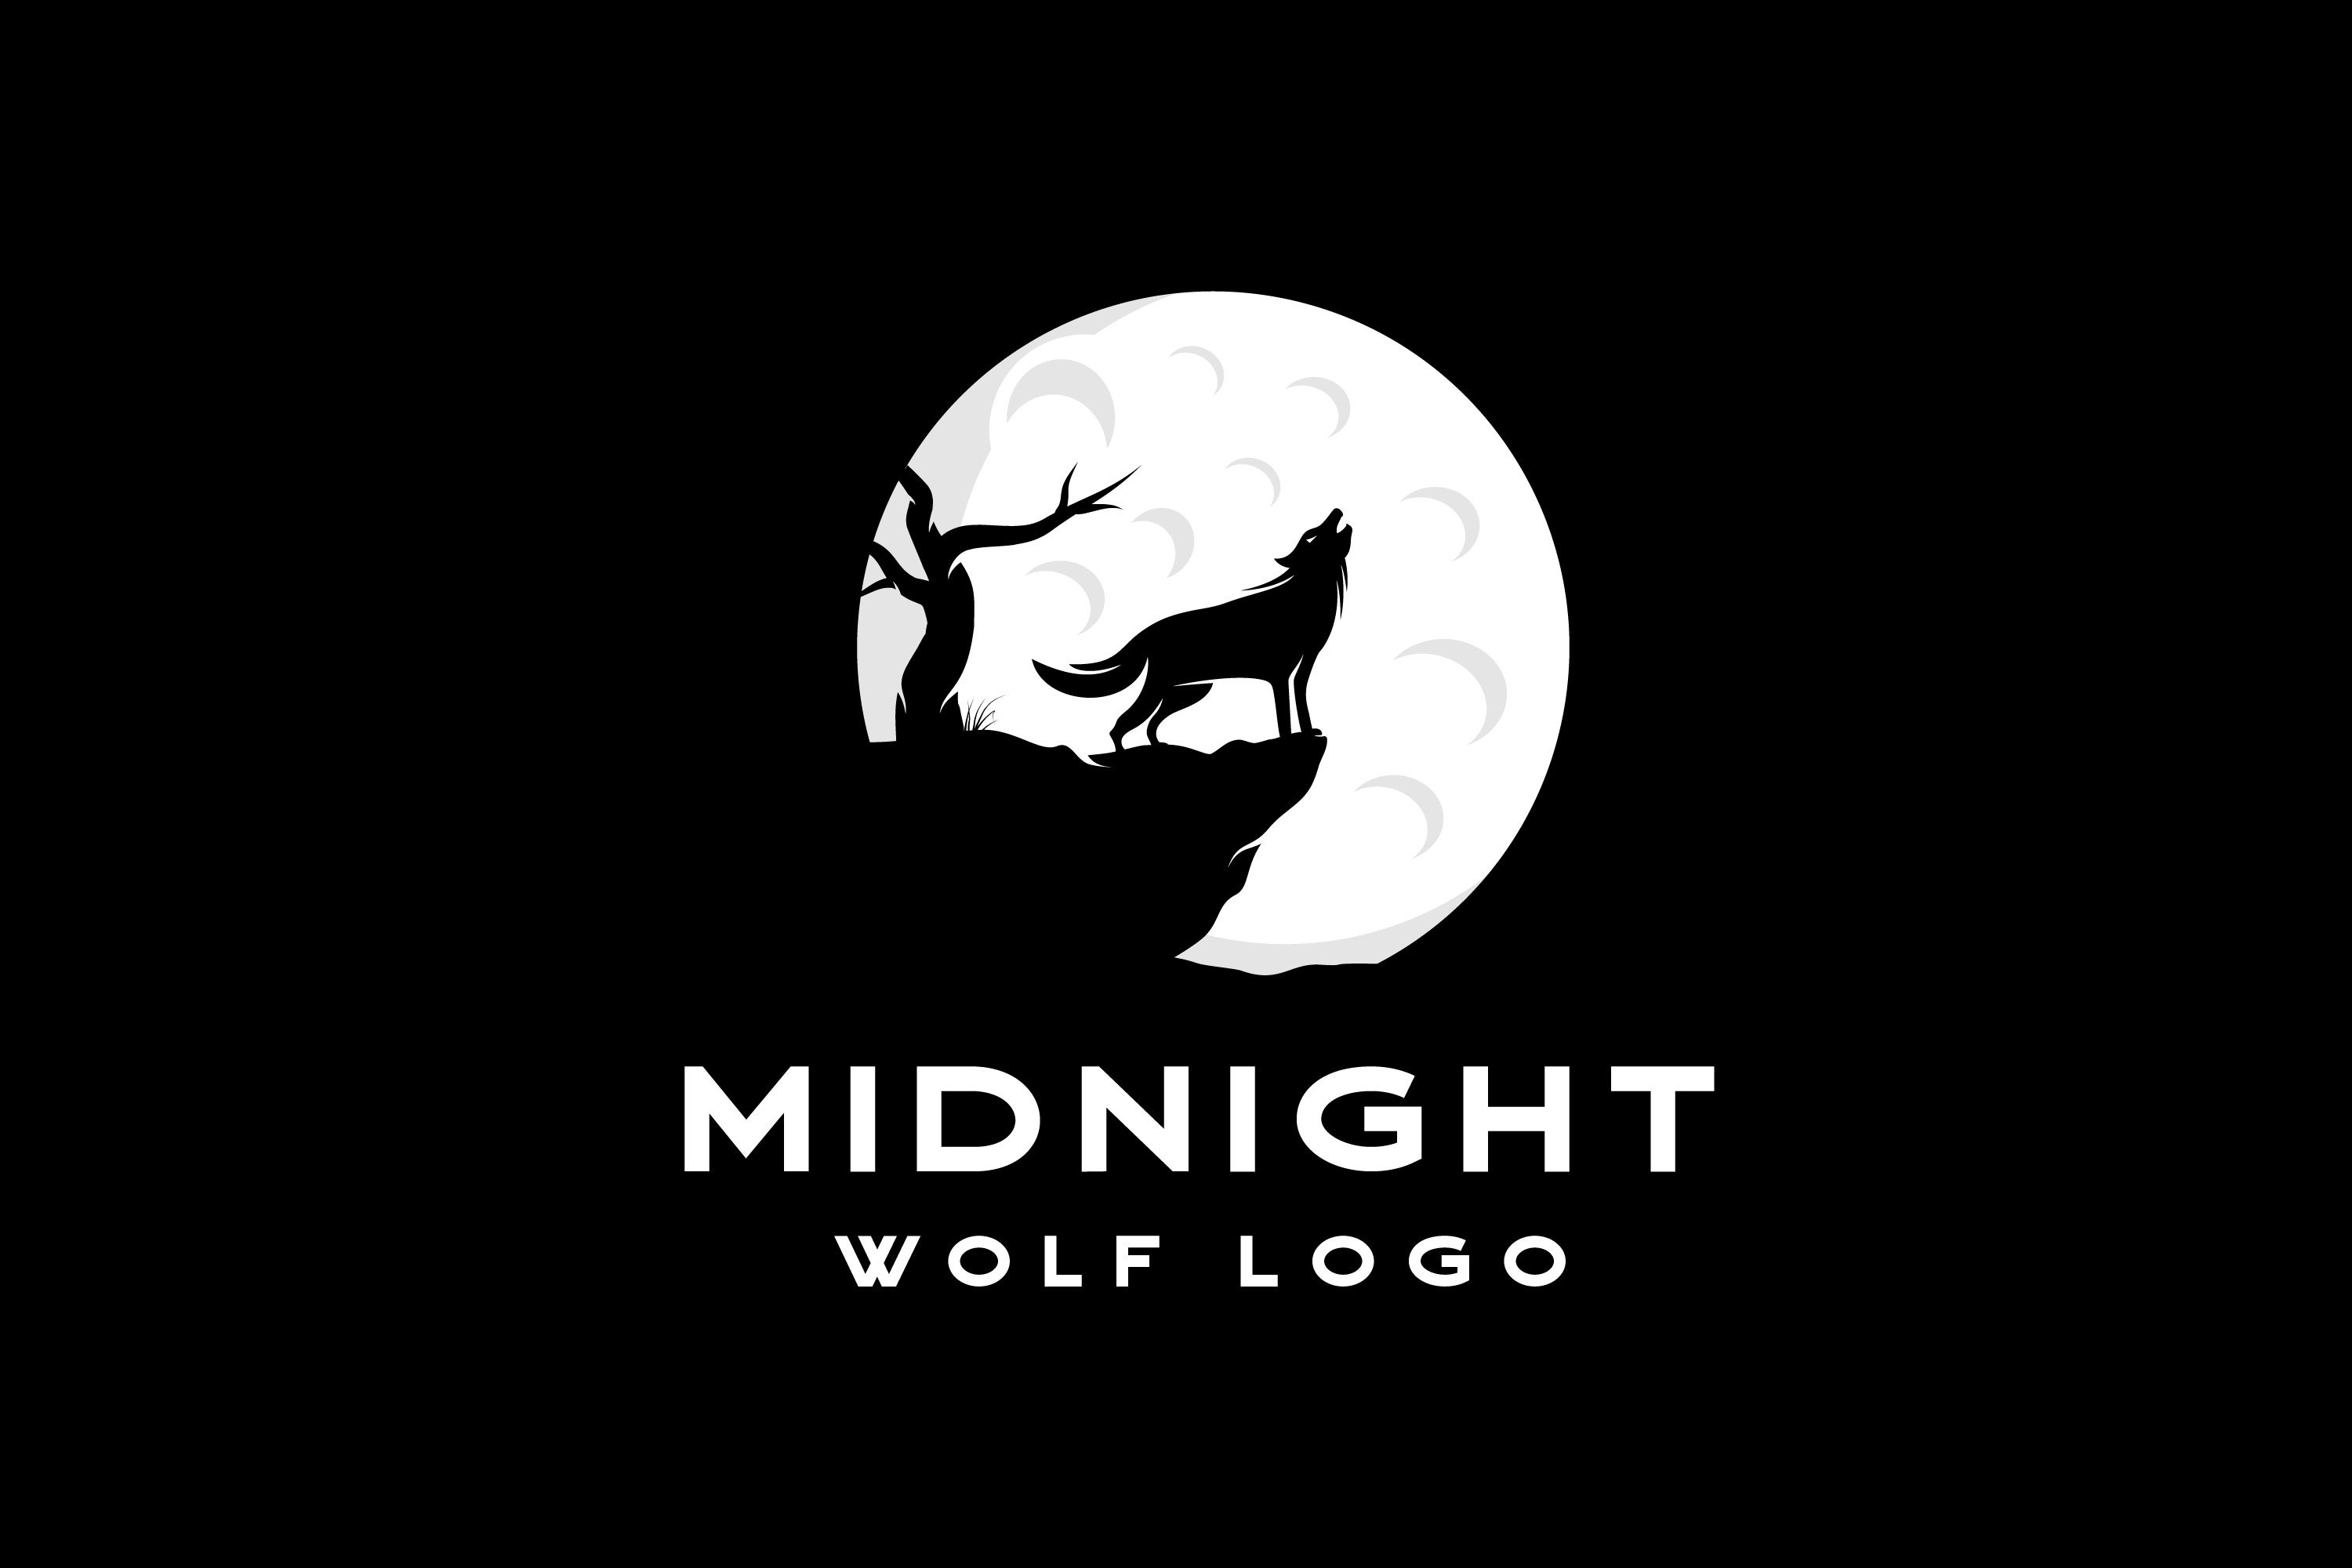 Howling Wolf at Night Logo Design cover image.